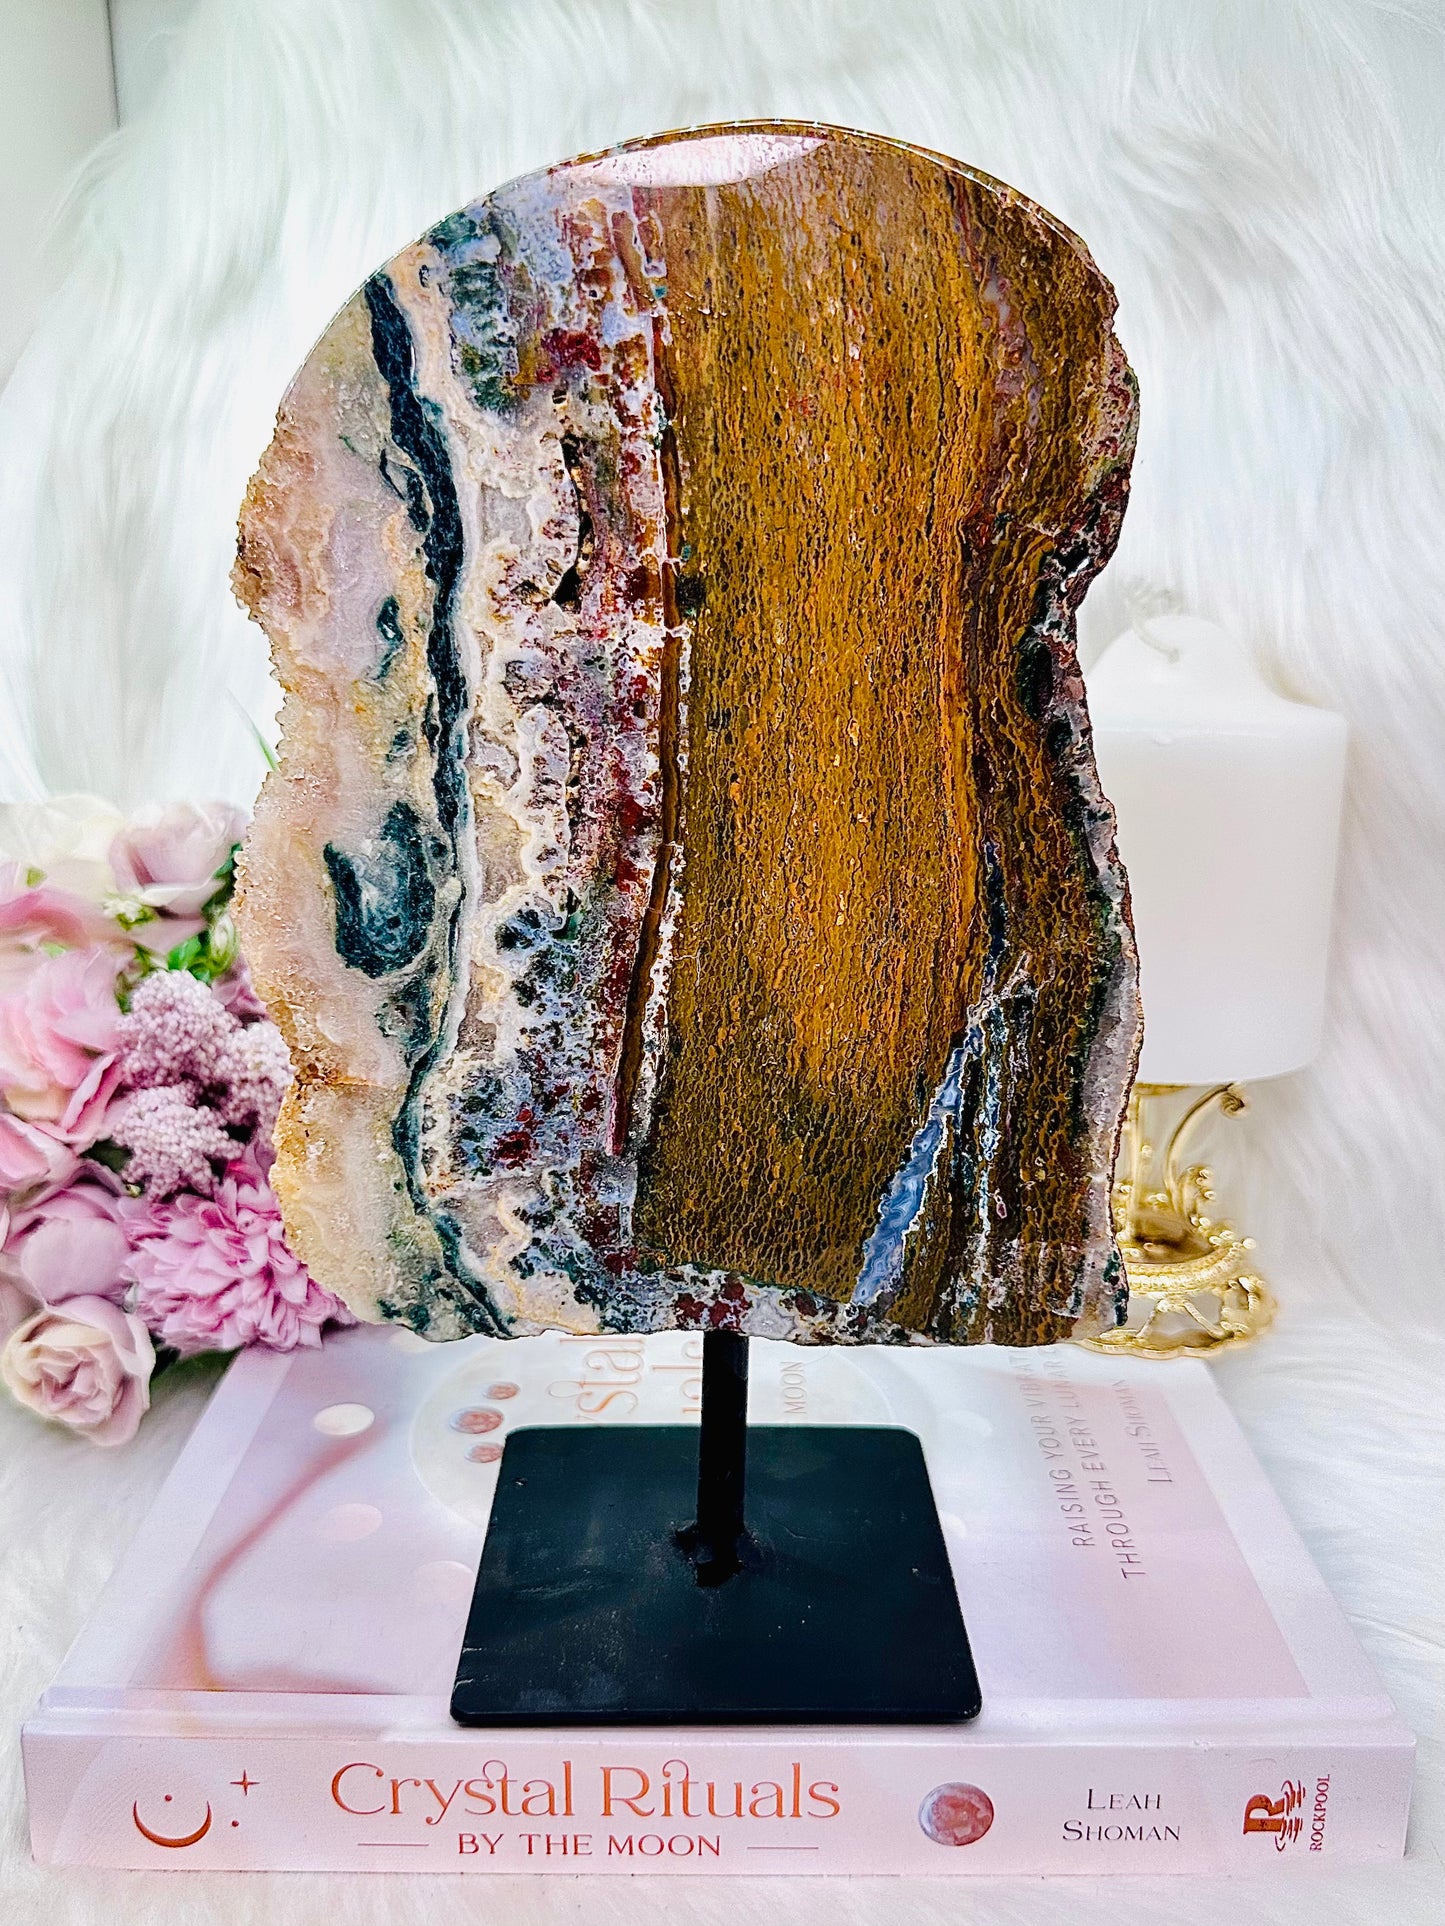 Uniquely Incredible!!!! Absolutely Amazing Large 23cm 1.18KG Colourful Jasper Slab On Stand ~ A Truly Amazing Piece